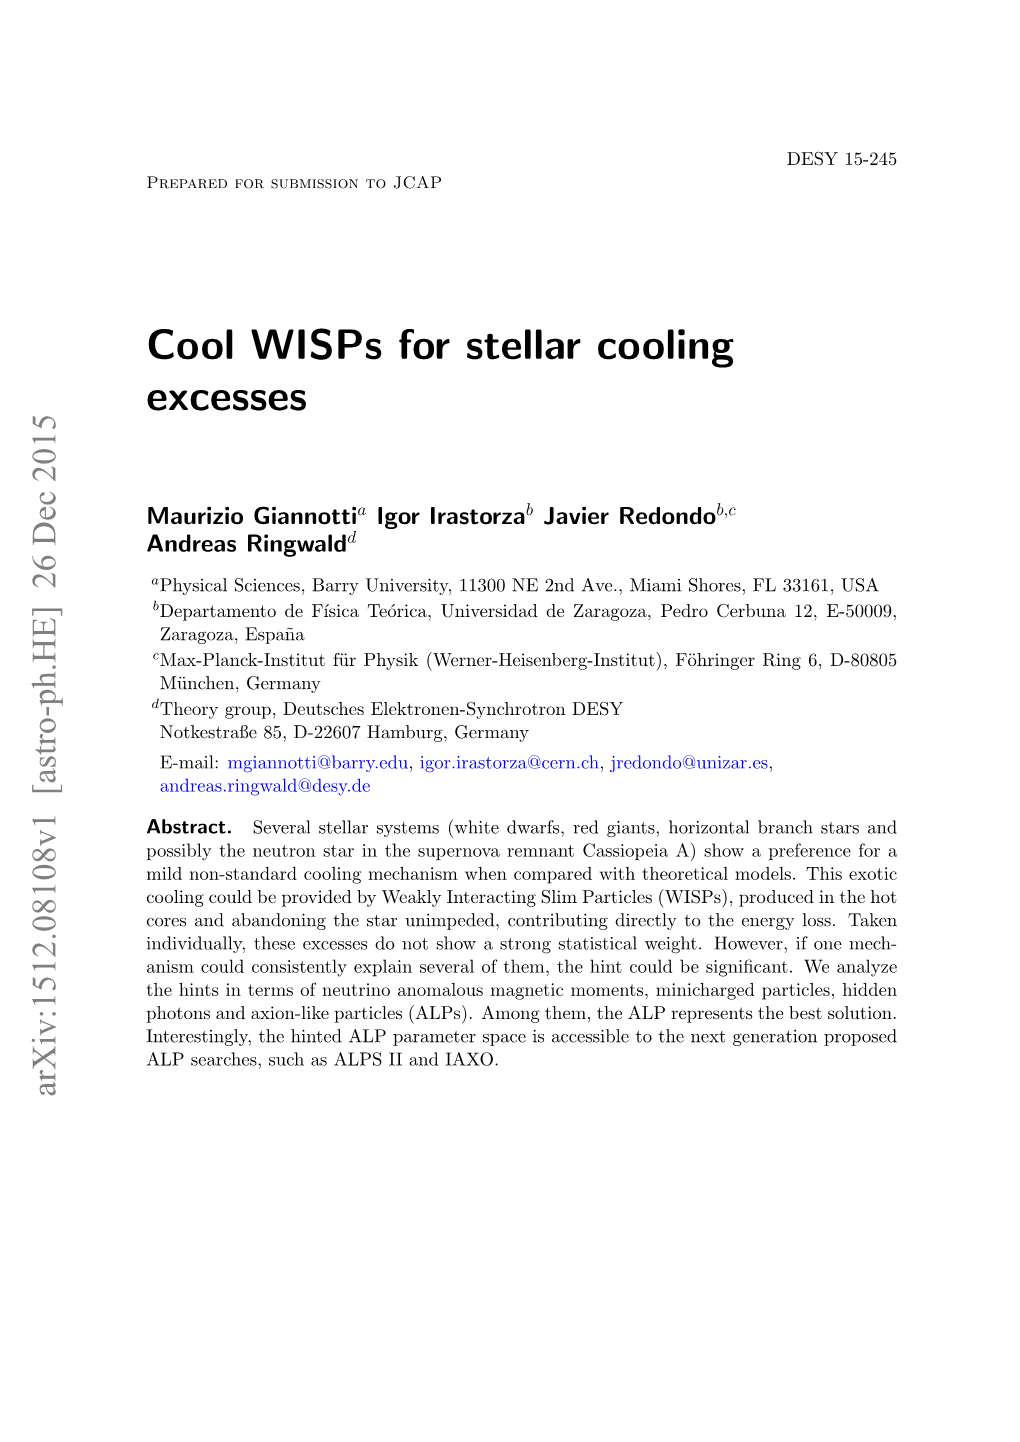 Cool Wisps for Stellar Cooling Excesses